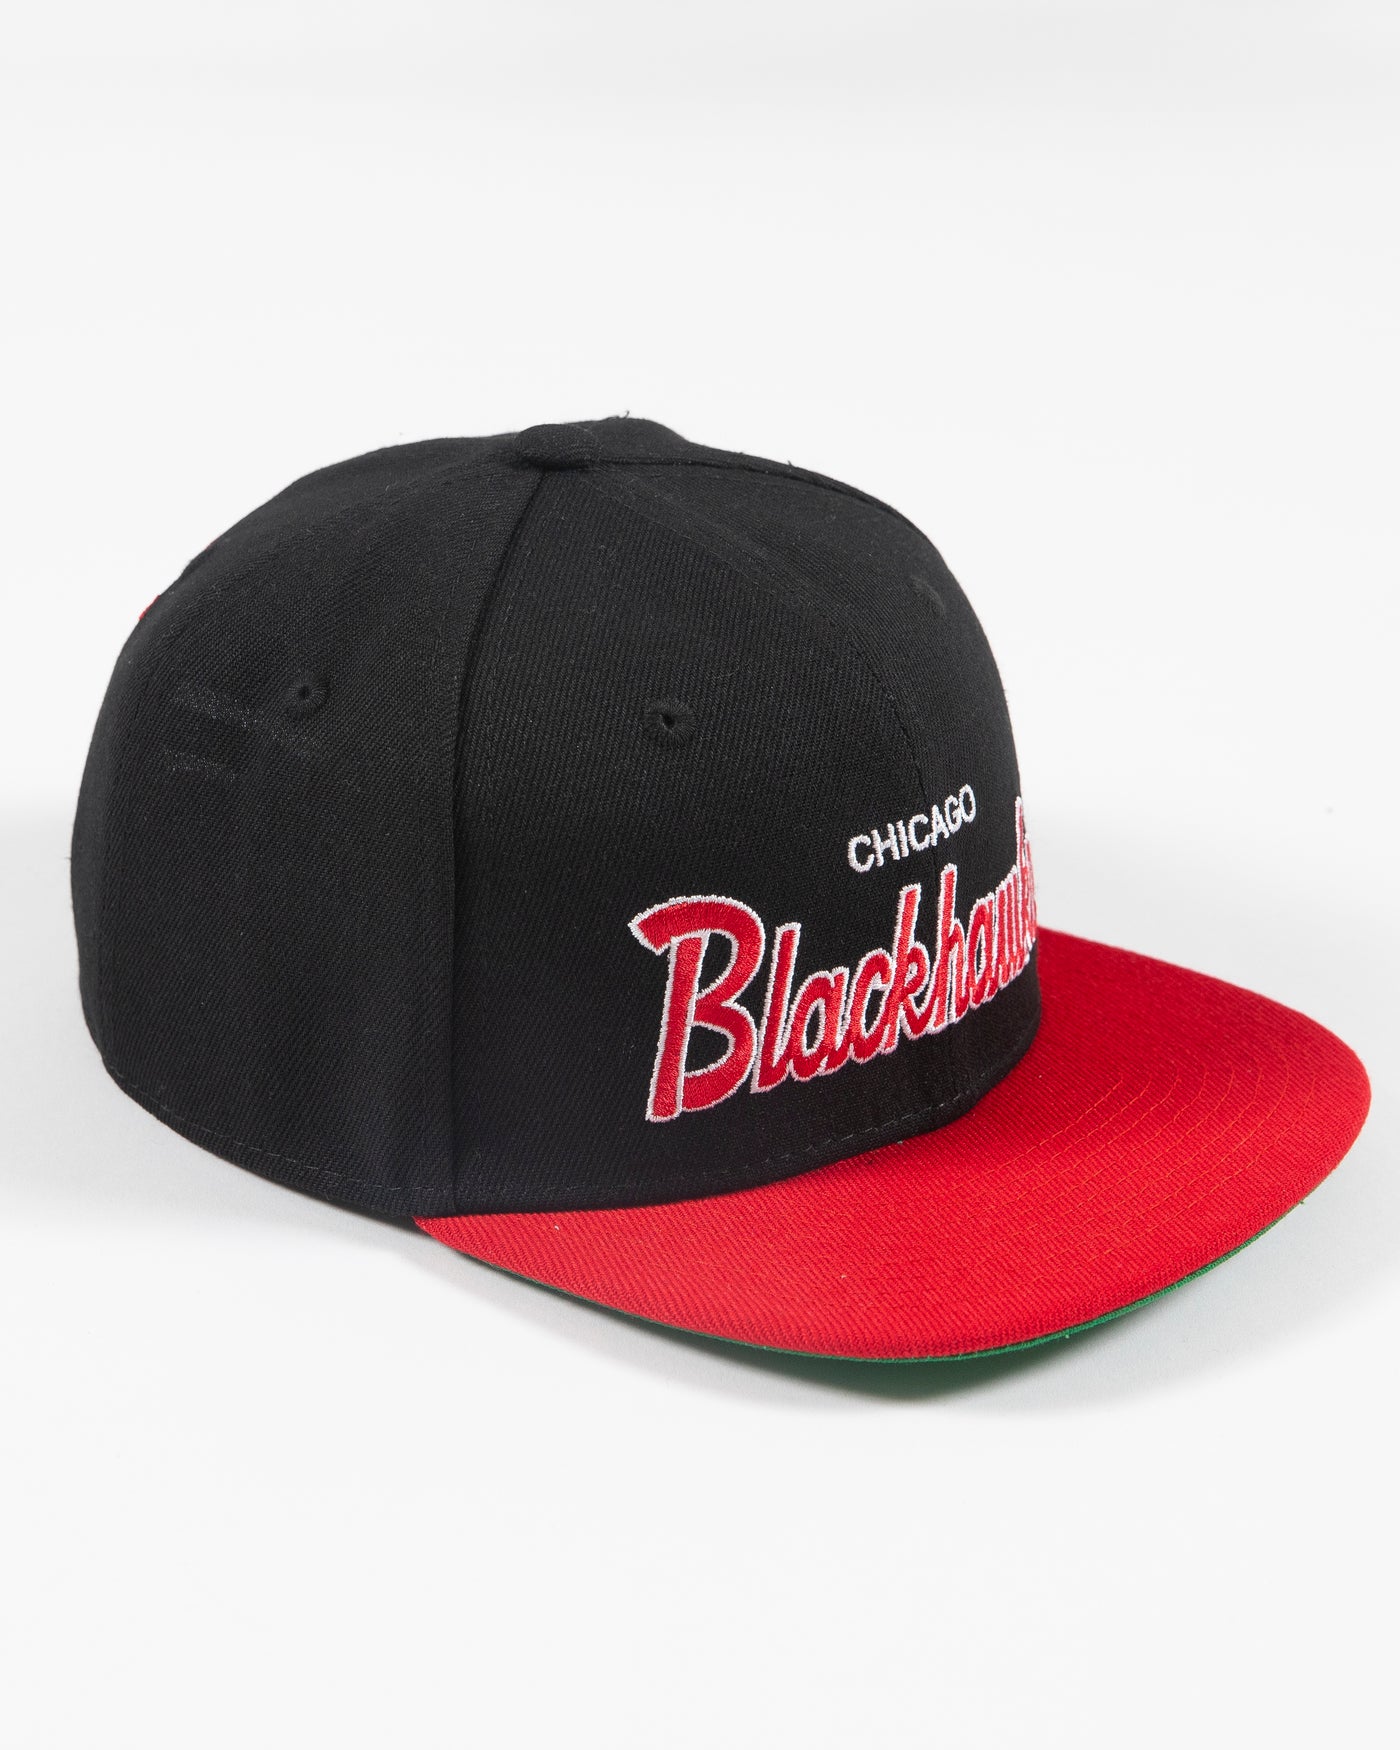 black and red Mitchell & Ness youth snapback cap with Chicago Blackhawks wordmark embroidered on front and primary logo embroidered on left side - right angle lay flat